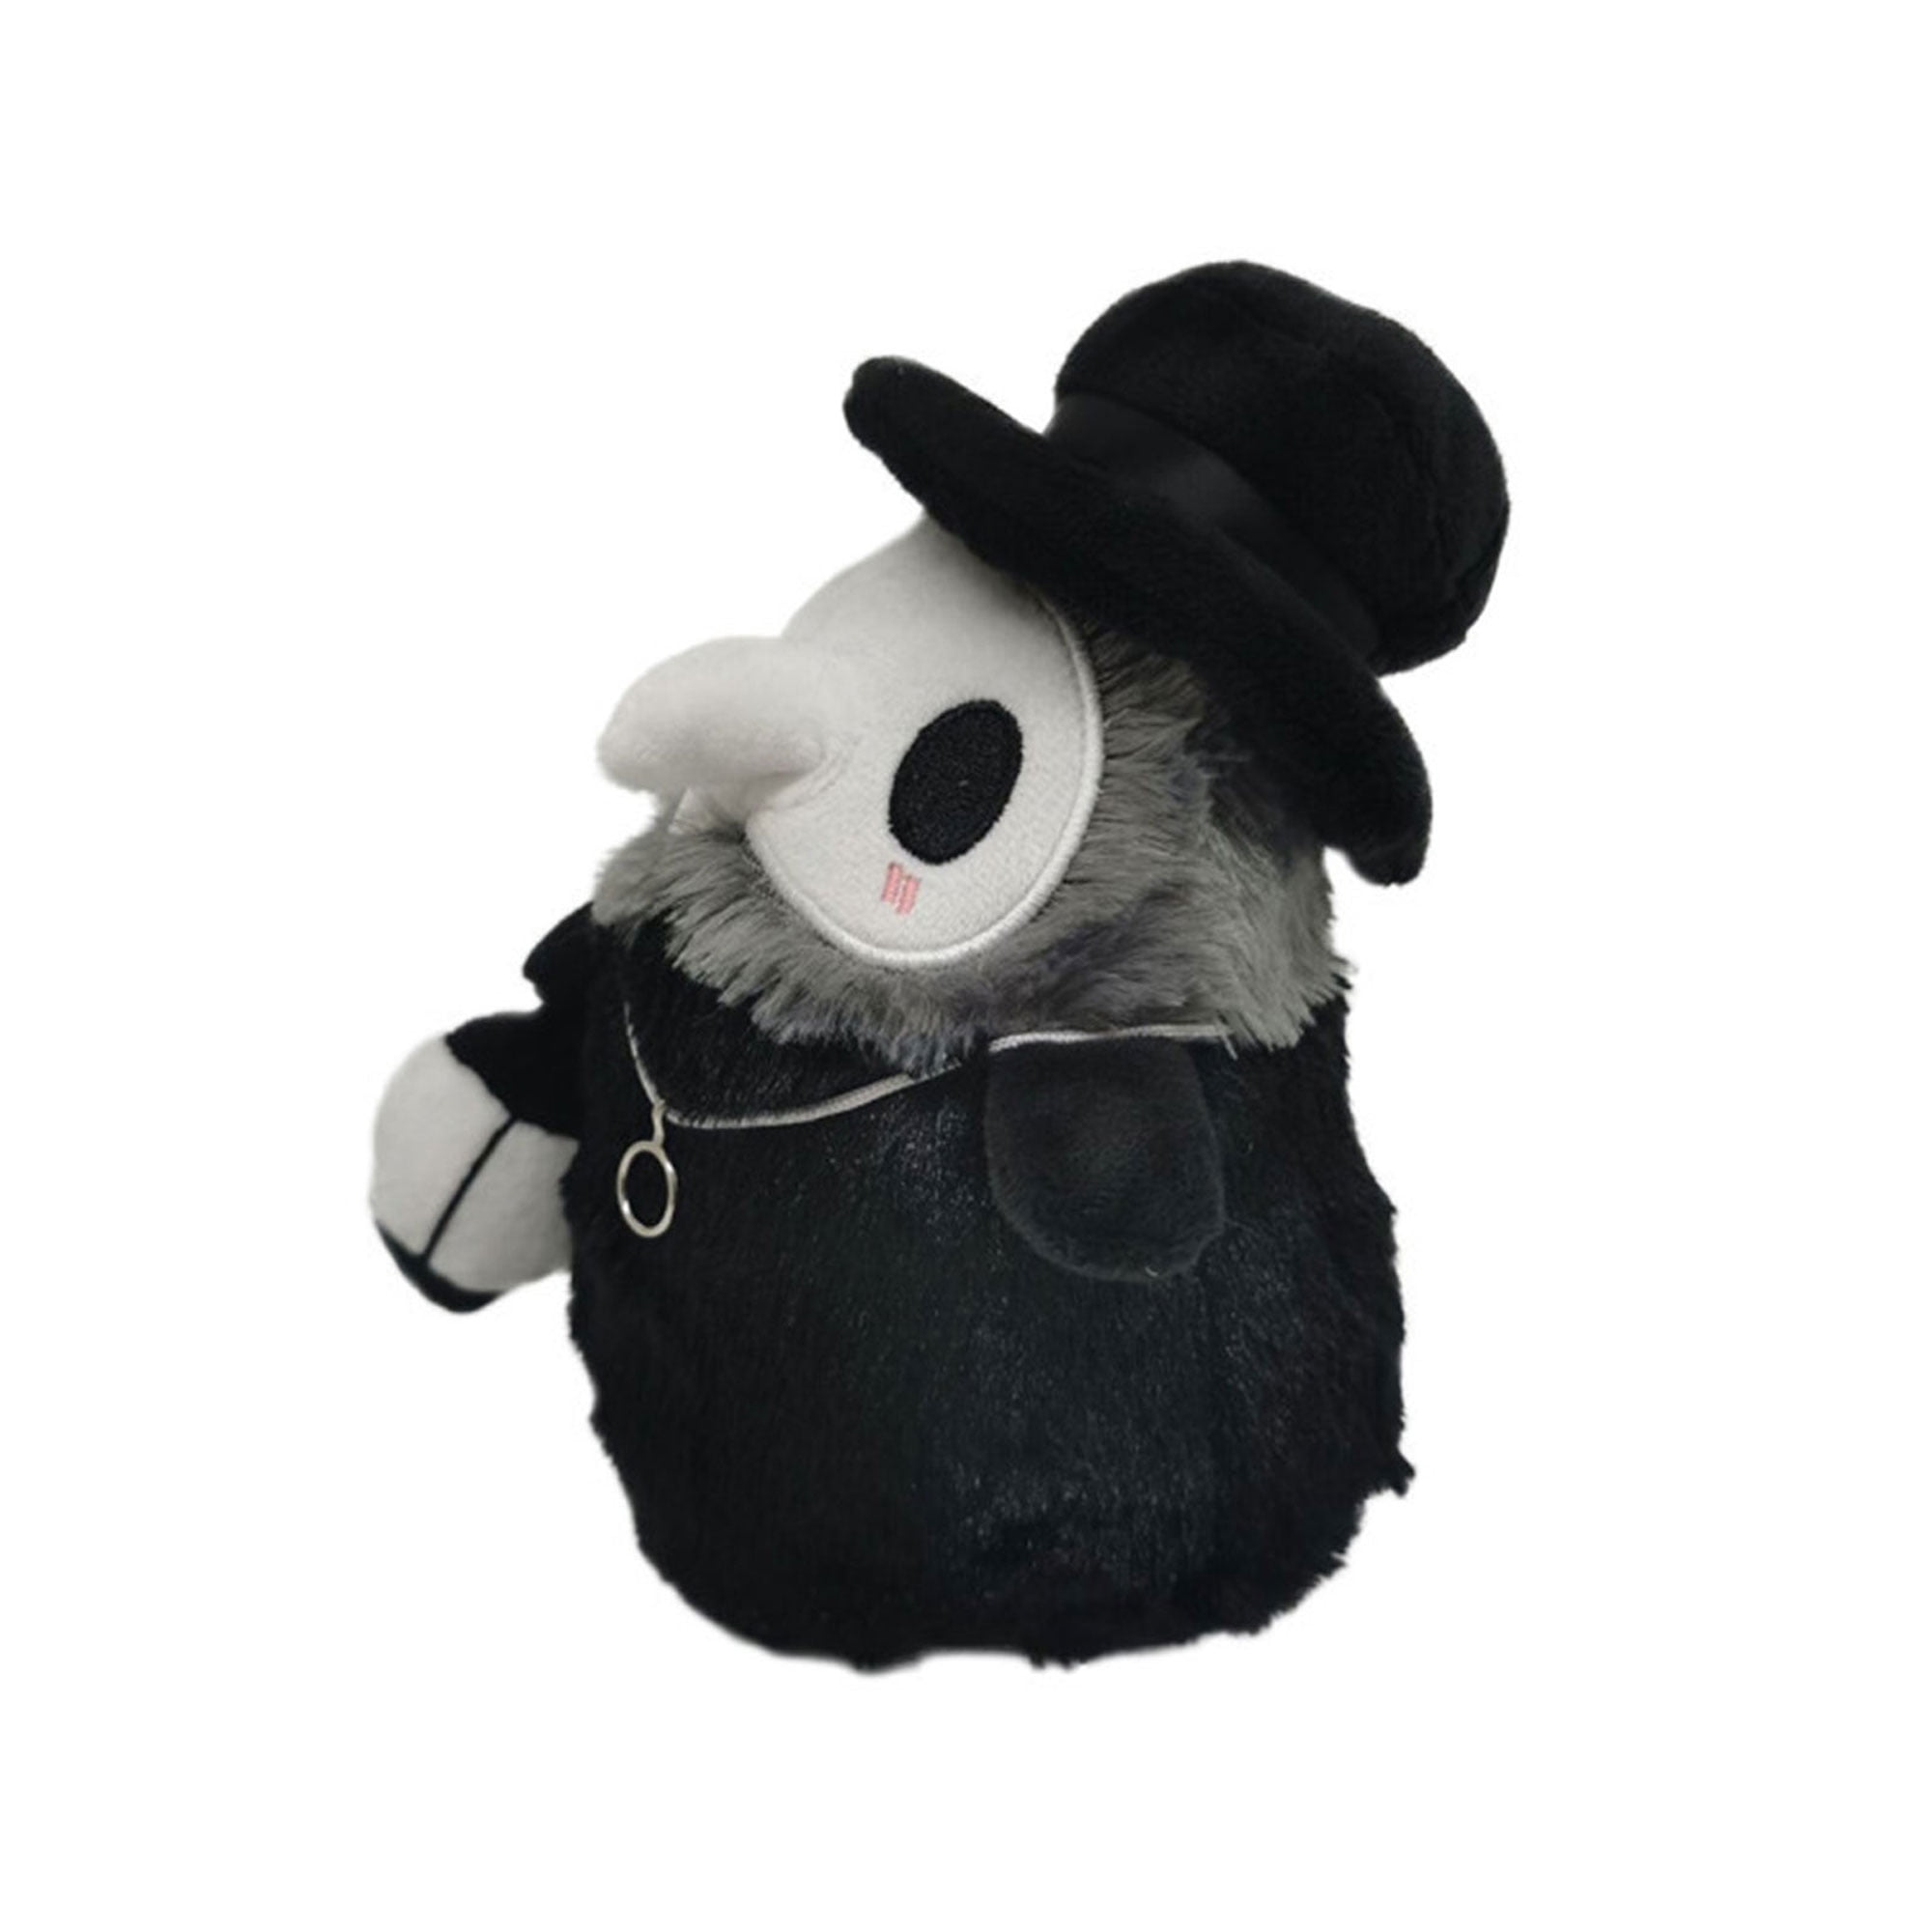 Fluffy Plague Doctor Plush Doll Toys Best Gifts for Doctor Nurse and Kids Glow in Dark 20cm Stuffed Crow Doll